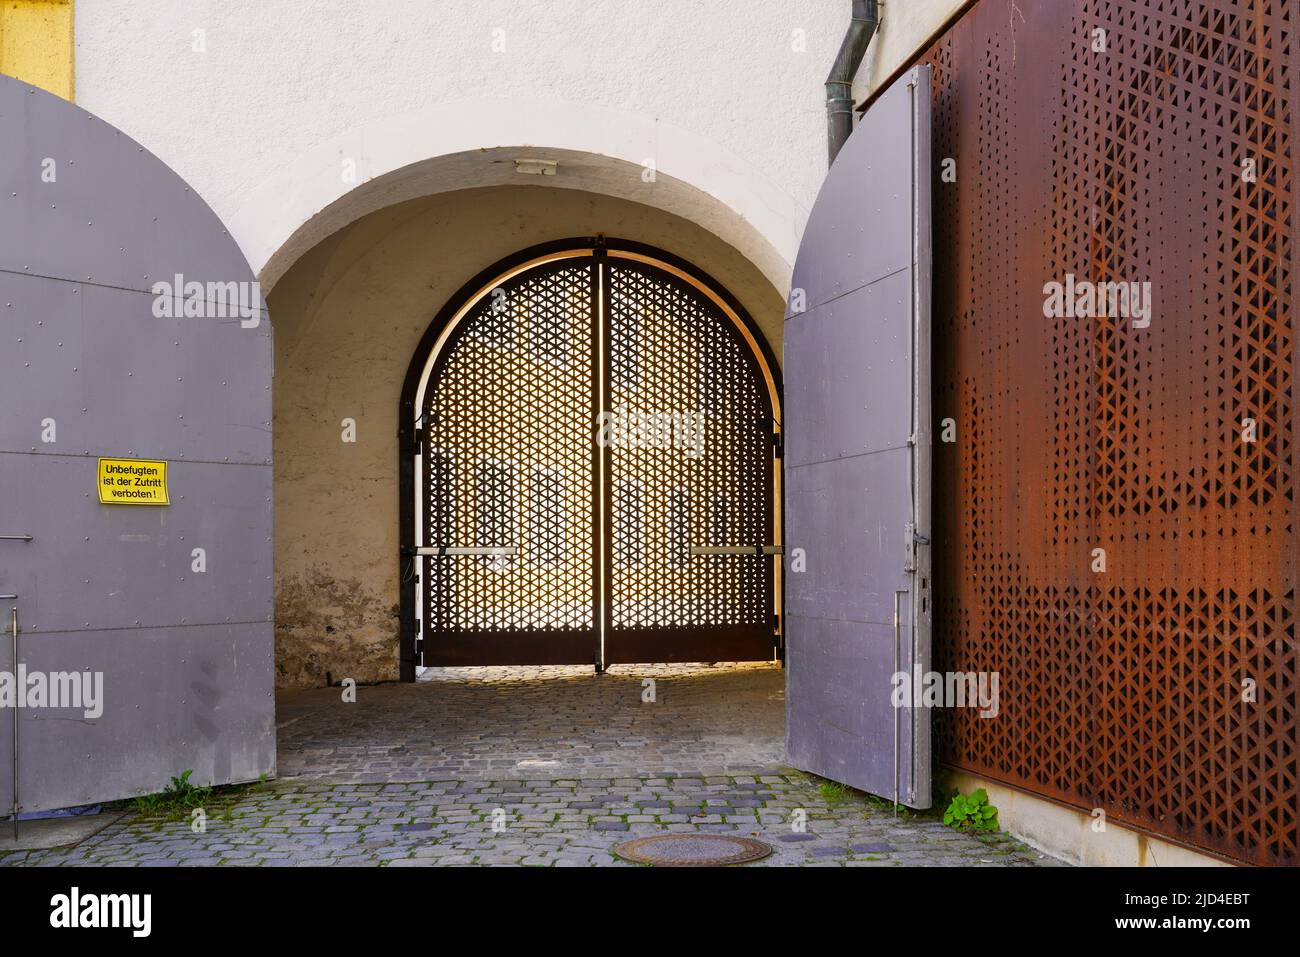 Entrance gate at the former monastery Niedernburg, former Marienkirche in Passau Old Town, Bavaria, Germany, 11.6.22 Stock Photo